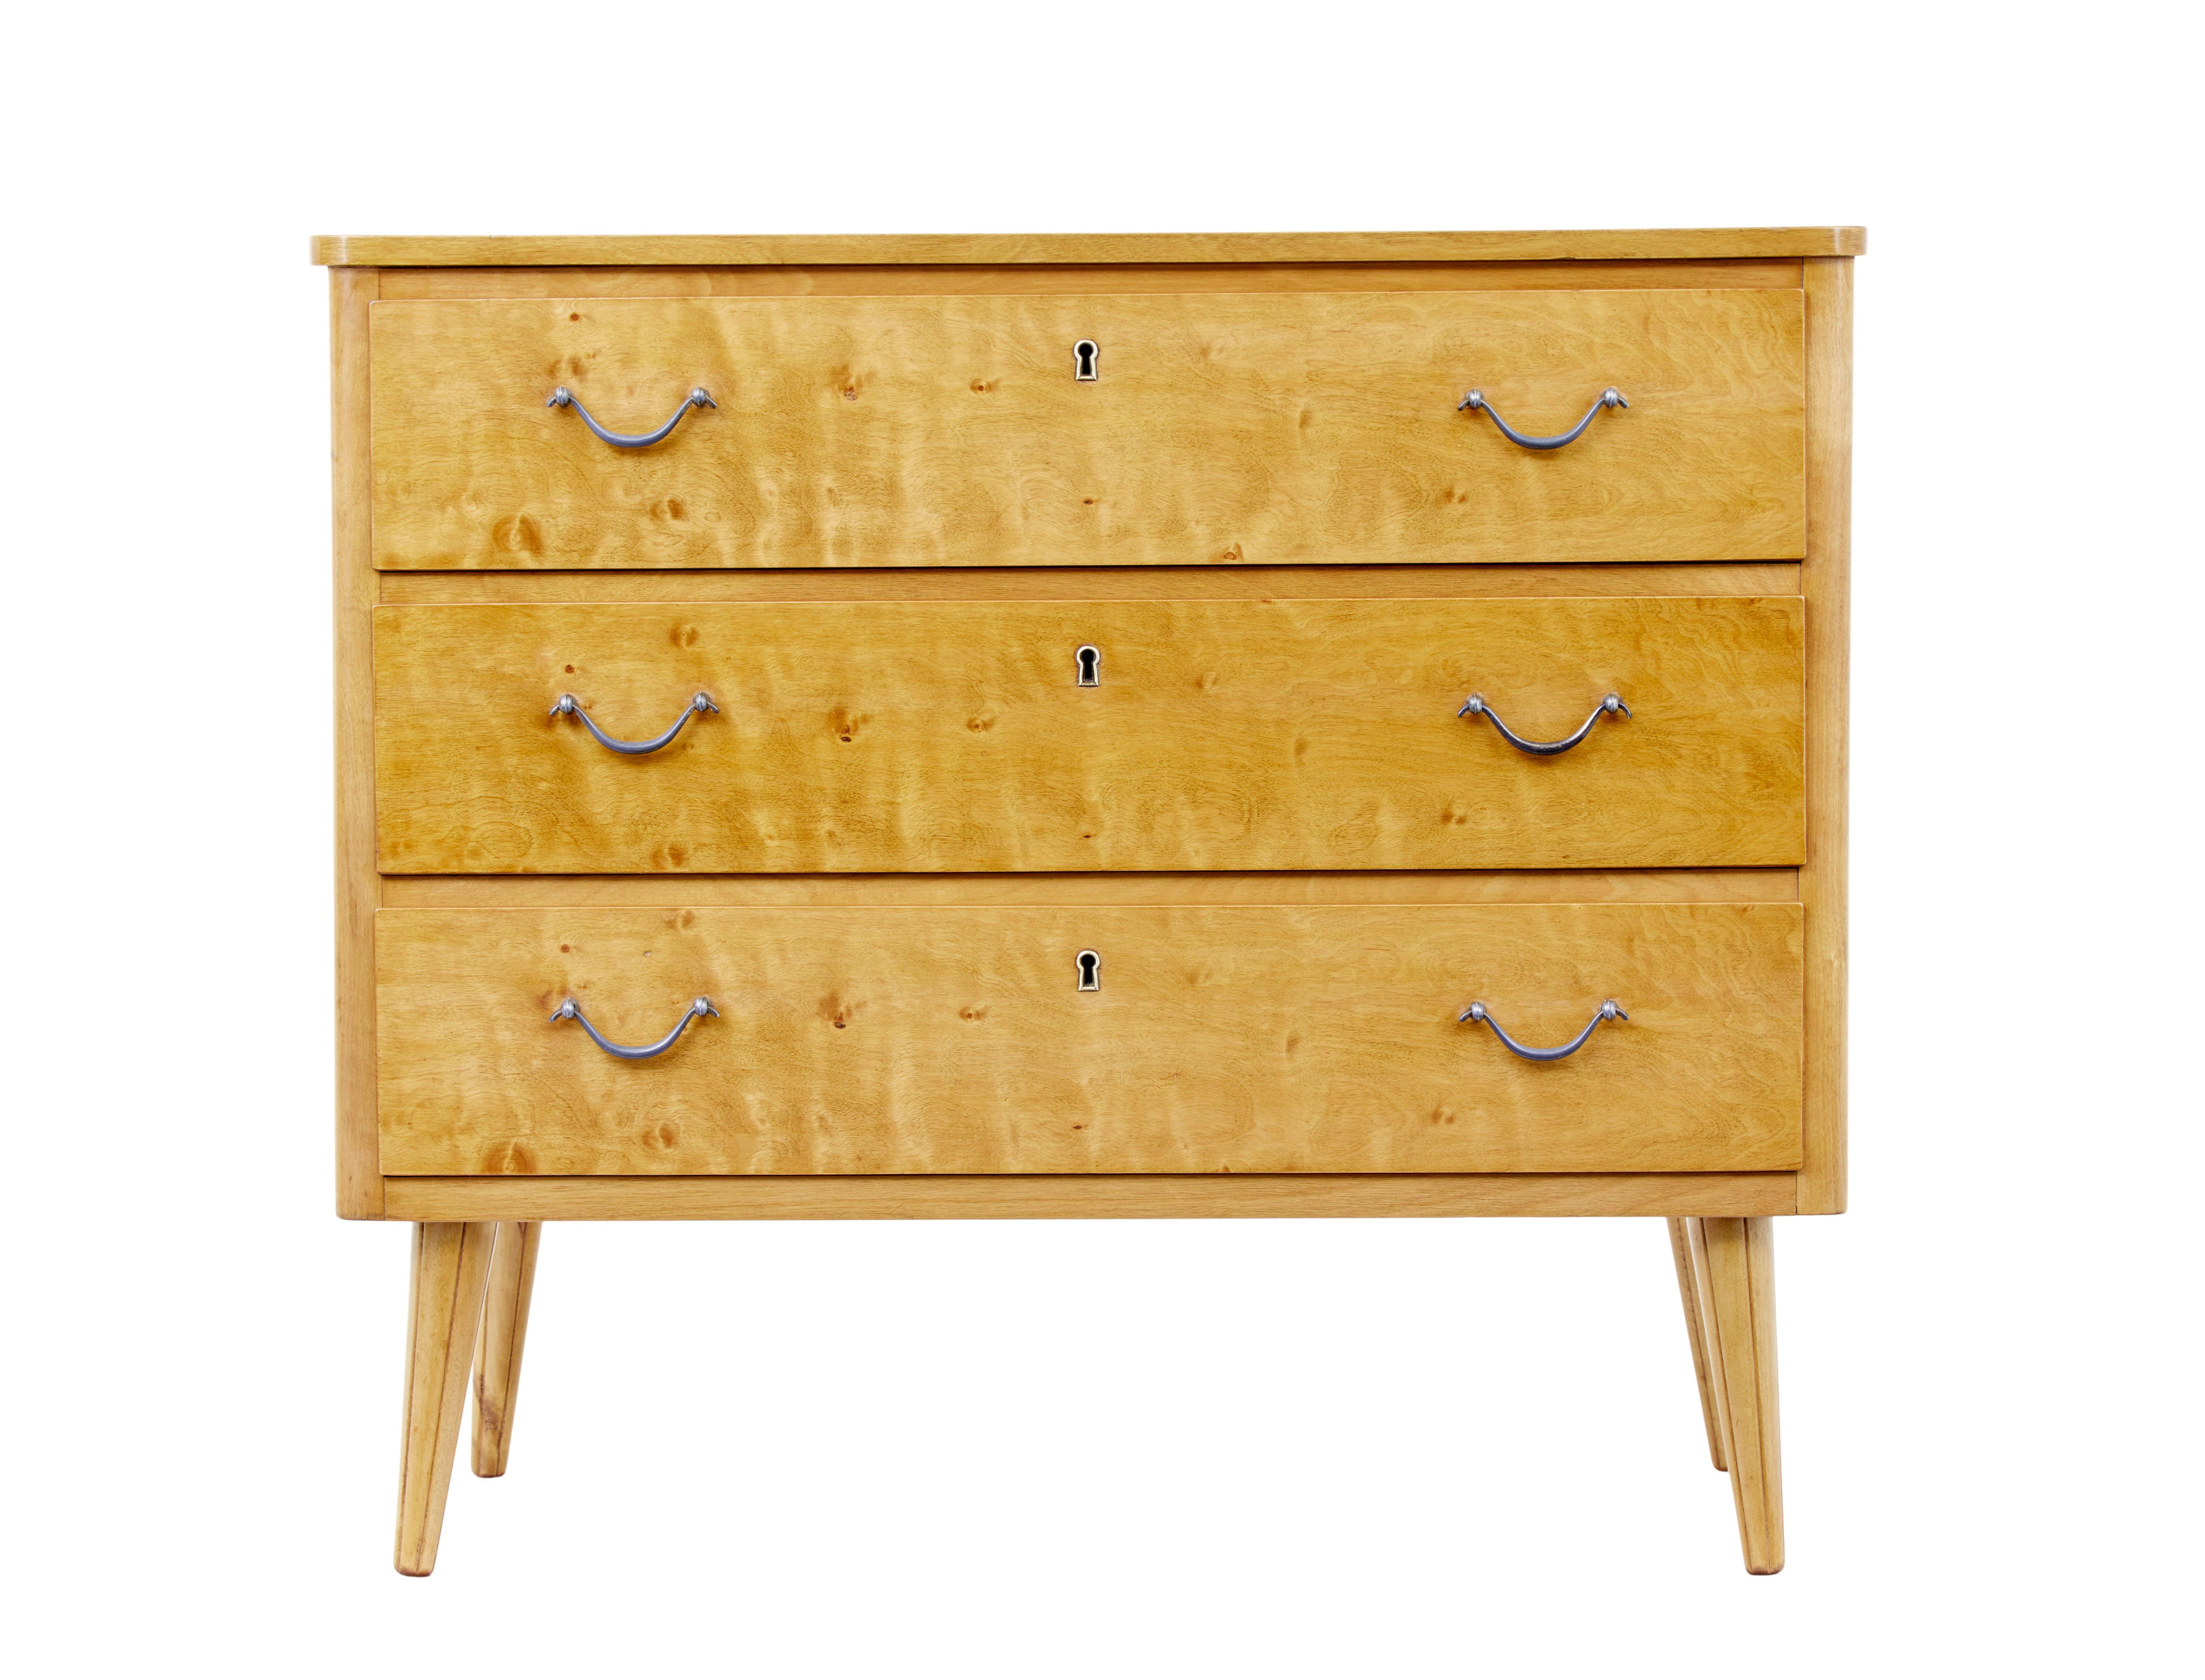 Scandinavian birch chest of drawers circa 1960.

Fine example of simple but elegant Swedish mid century furniture.  Rectangular top with rounded corners, fitted with 3 drawers below each fitted with steel handles and brass keyhole.  Standing on 4